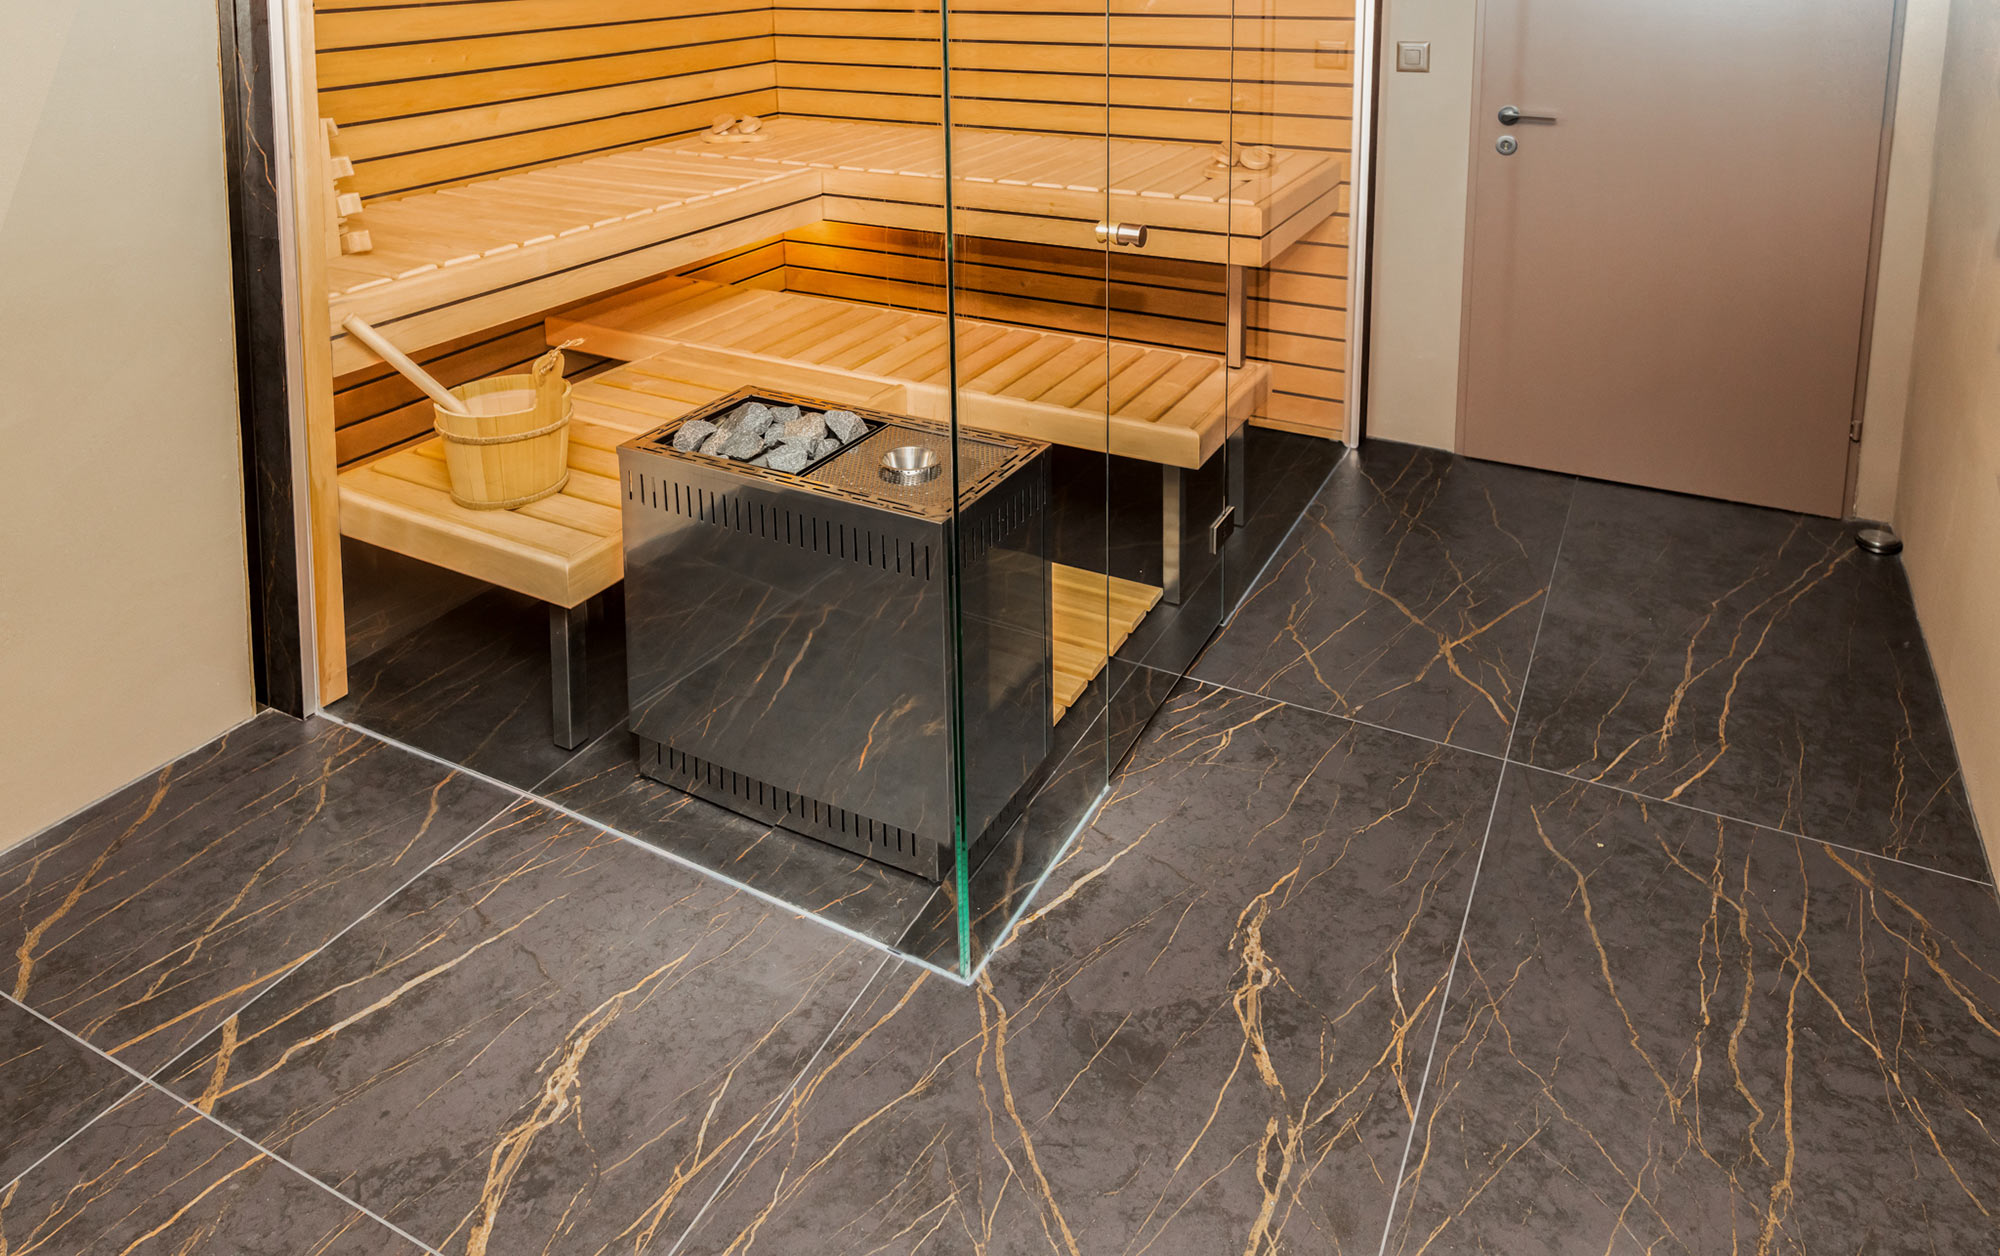 Image of sauna suiza laurent 4 in {{This sauna reaches its full wellness potential thanks to Dekton}} - Cosentino